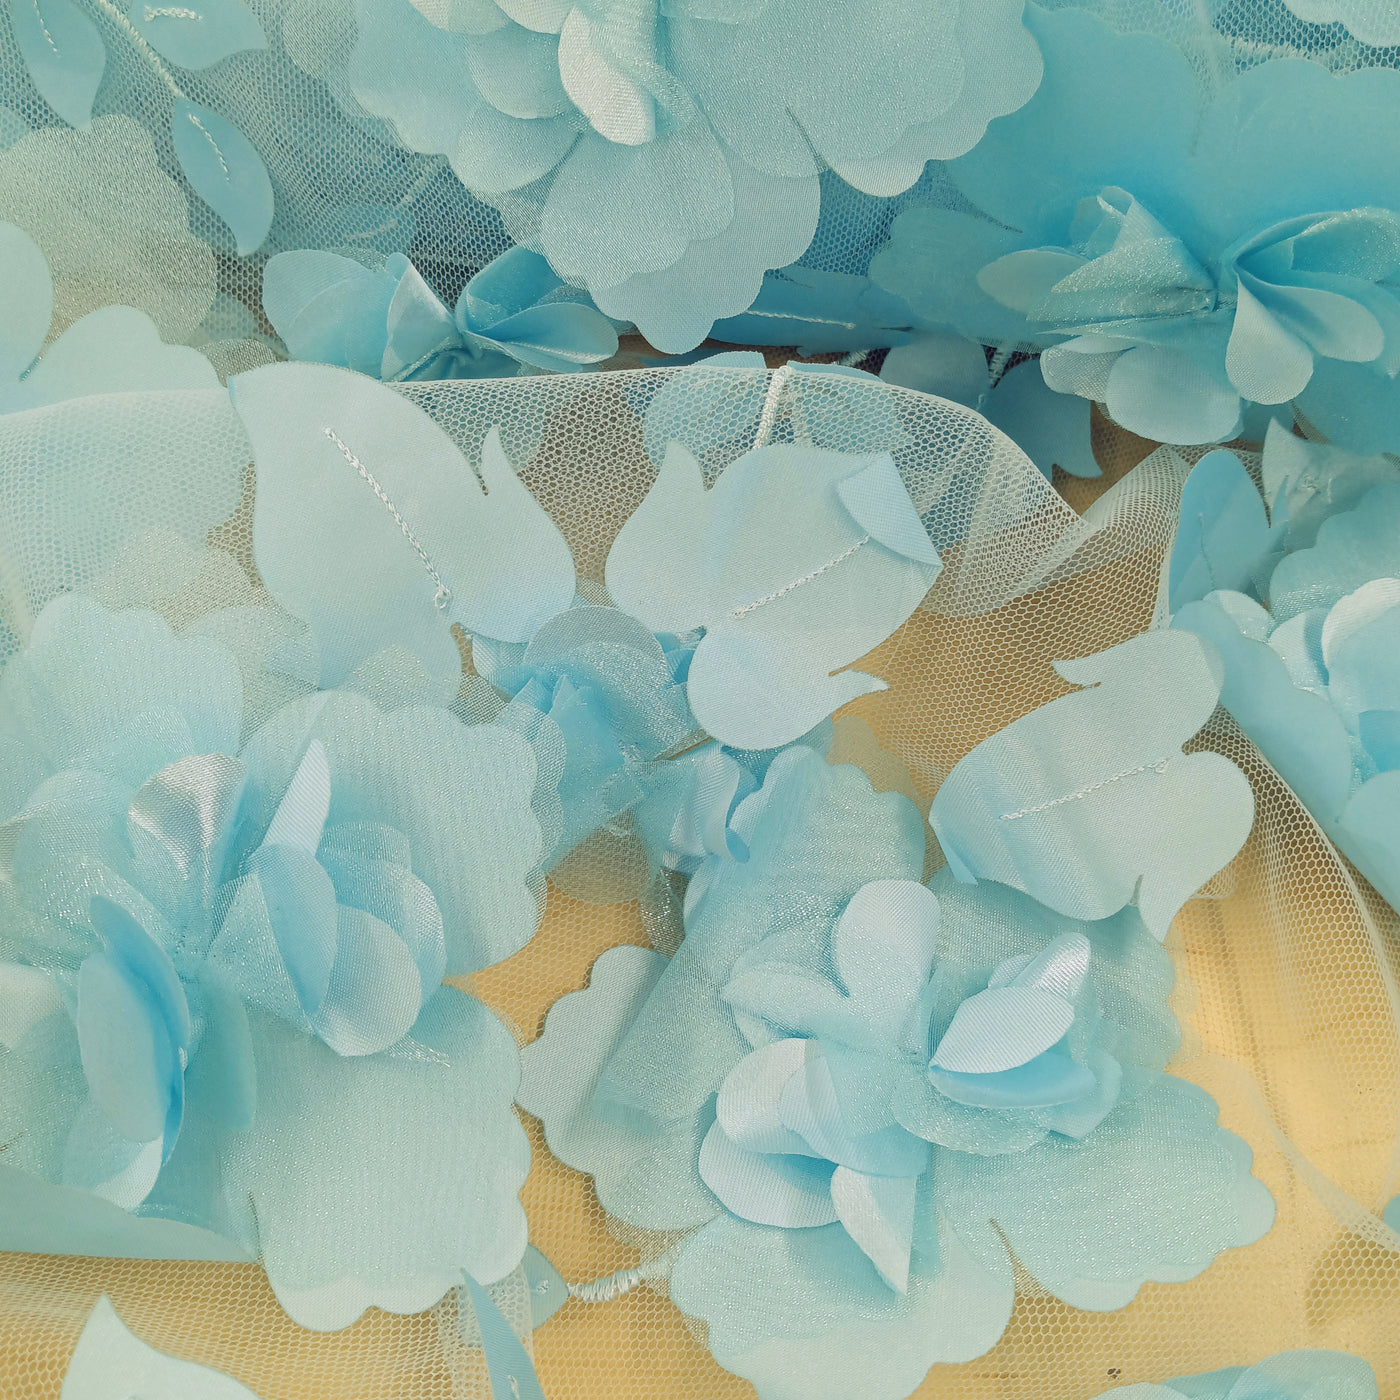 Delicate 3D Flowers Scattered on Lt. Blue Embroidered Soft Tulle Net Fabric. Perfect Wedding Lace for Bridal Dresses or Quinceanera Dresses 54" Wide. Sold by the Yard.  Lace Usa